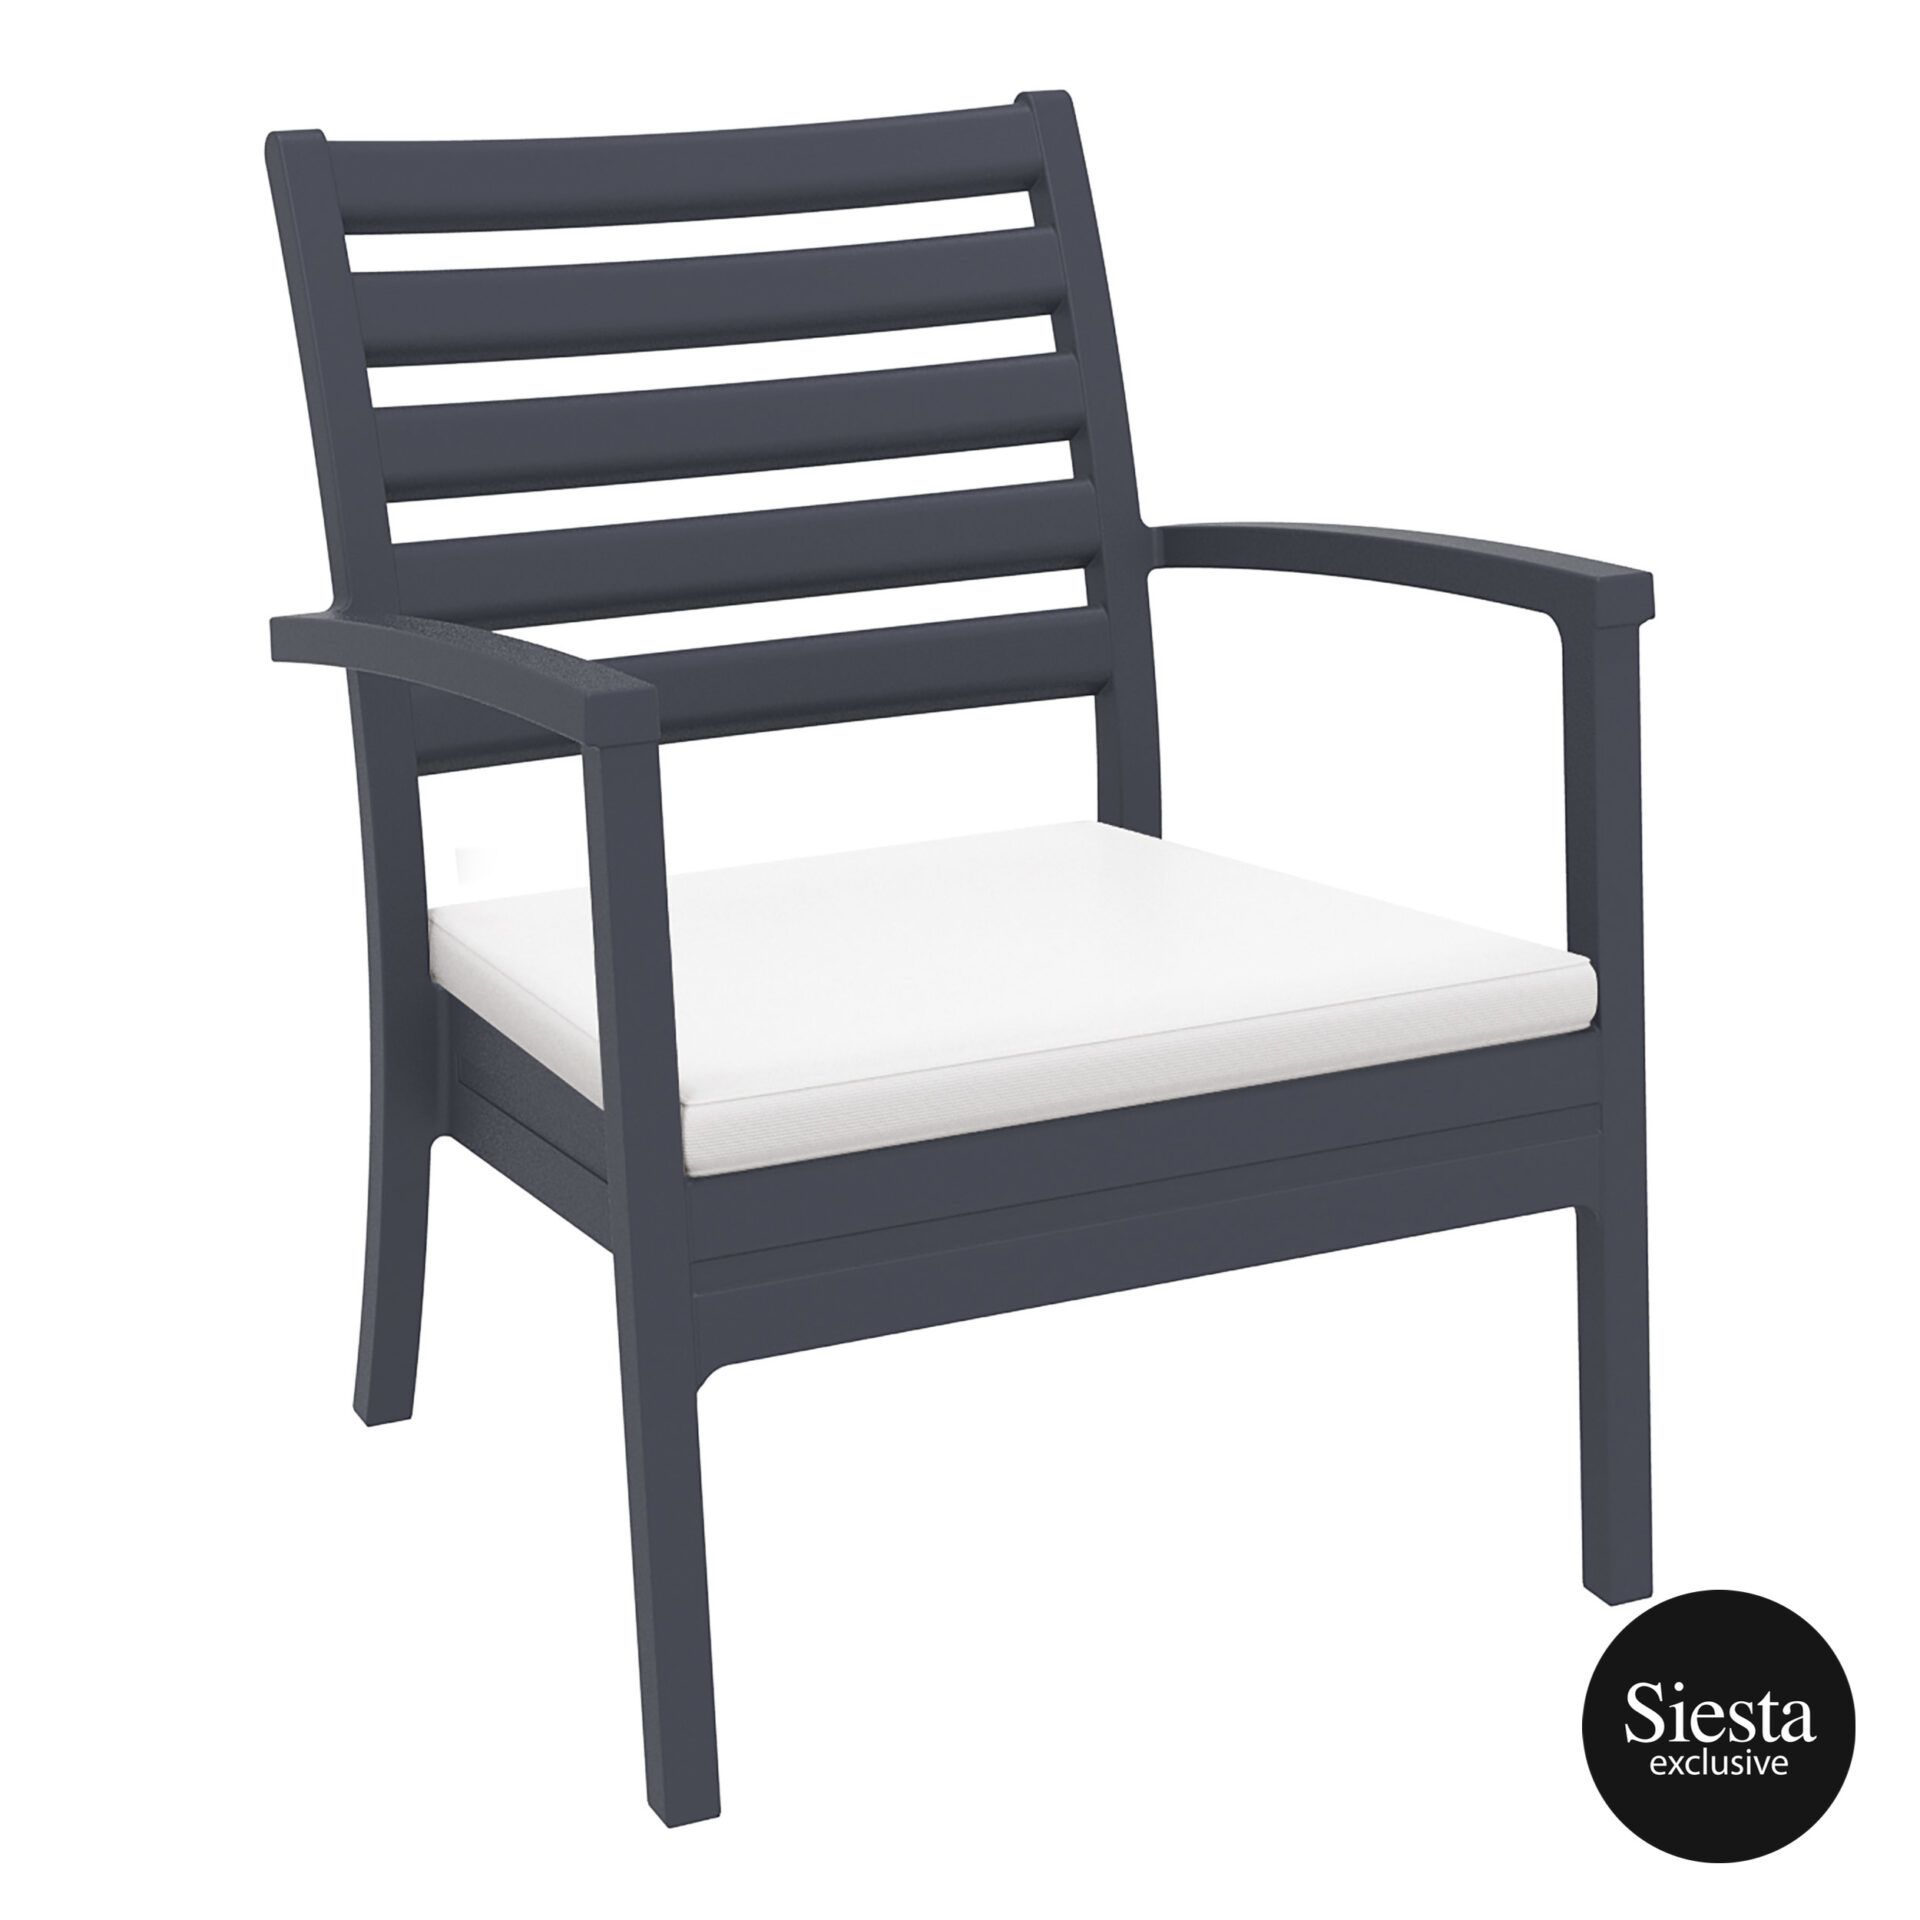 Artemis XL Armchair - Anthracite with White Seat Cushion